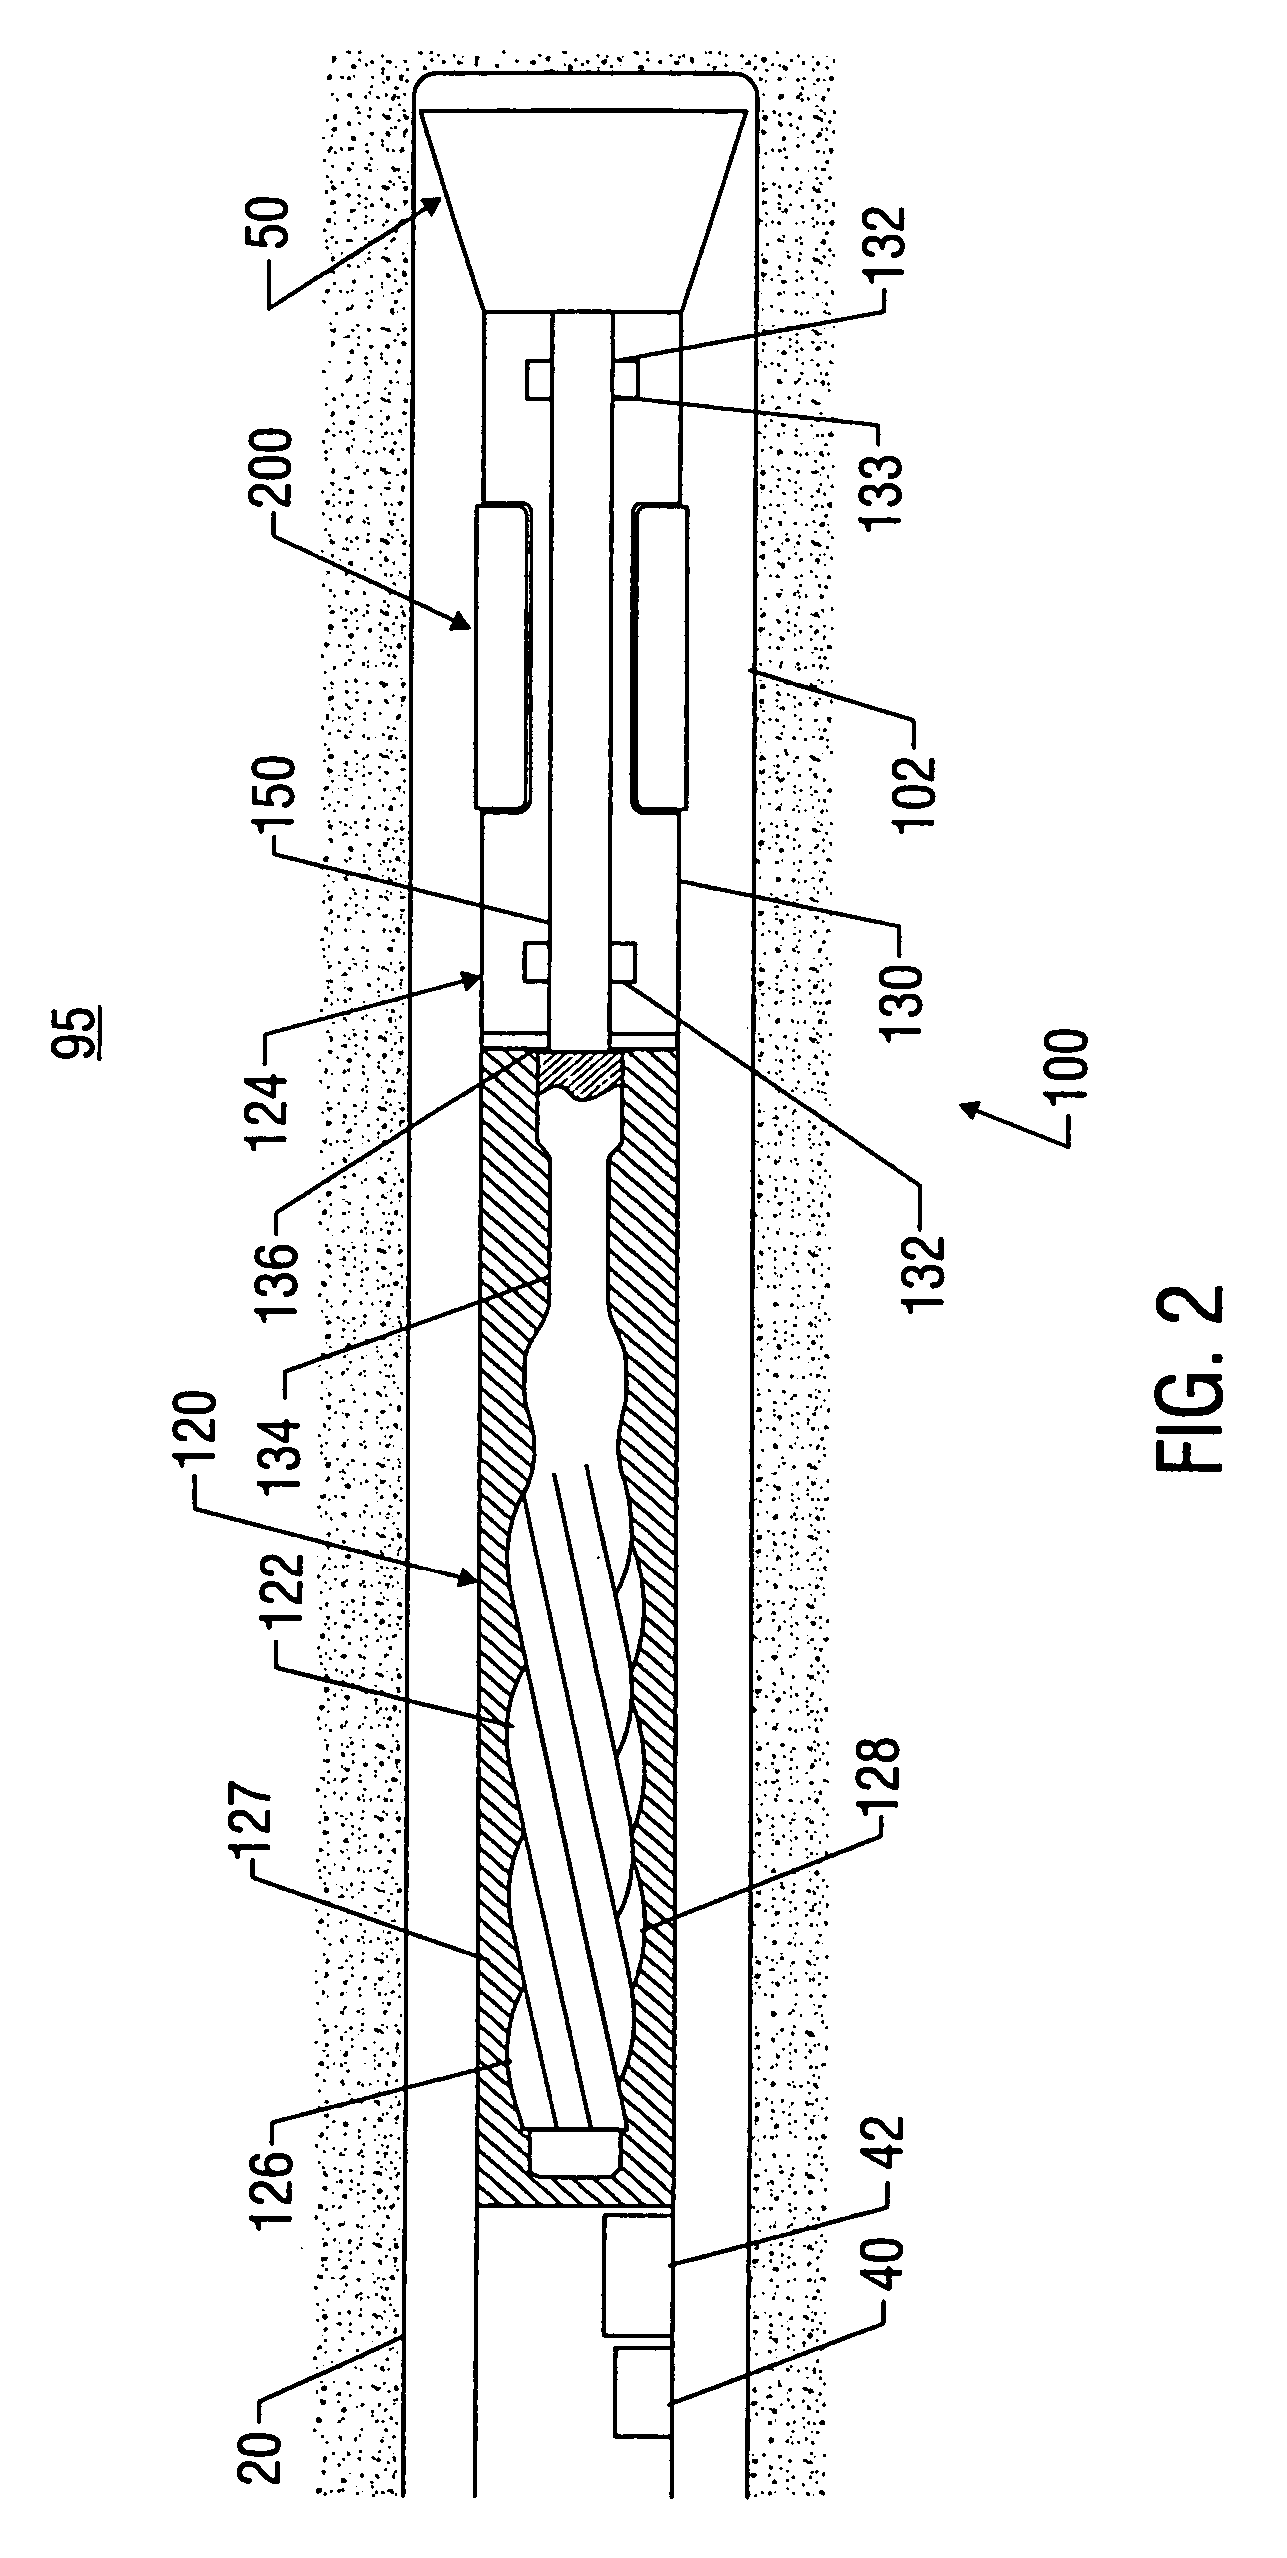 Closed loop drilling assenbly with electronics outside a non-rotating sleeve